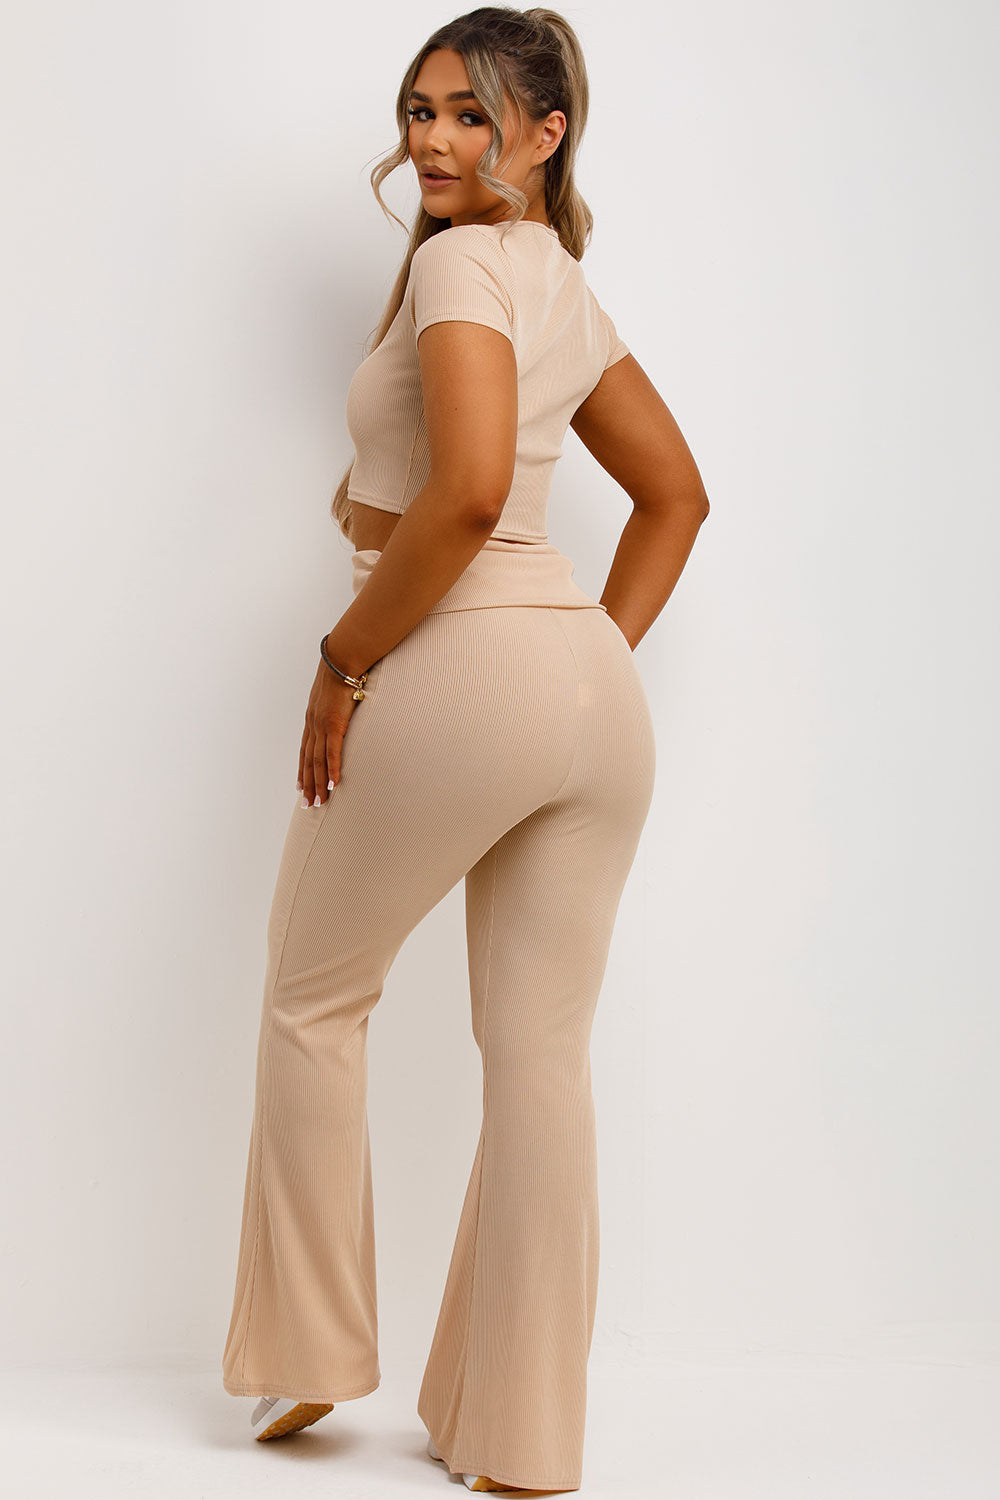 flared ribbed trousers with fold detail and crop top two piece matching set 